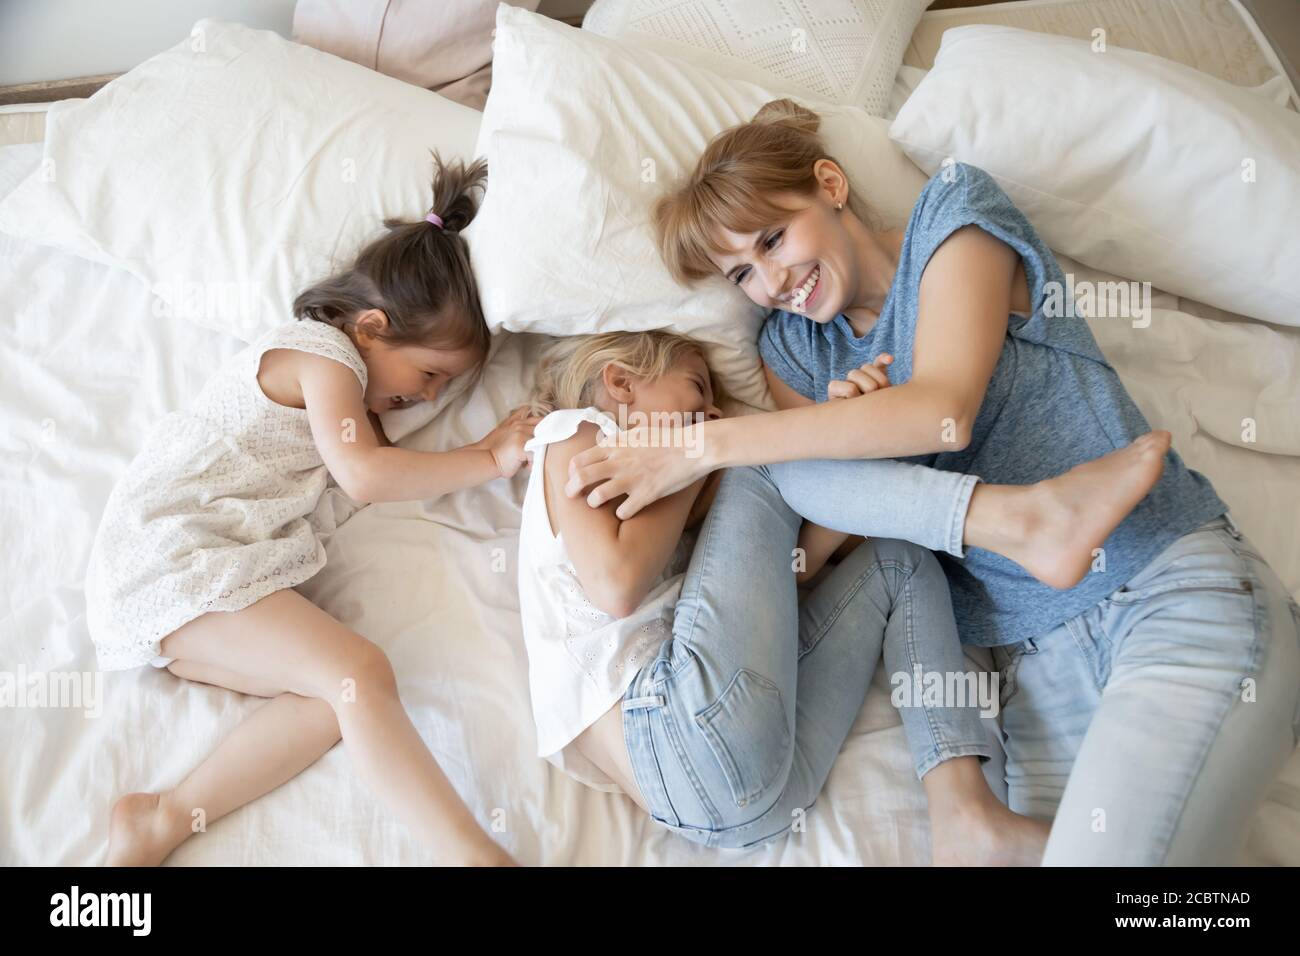 Friendly laughing mother and daughters tickling and playing on bed Stock Photo